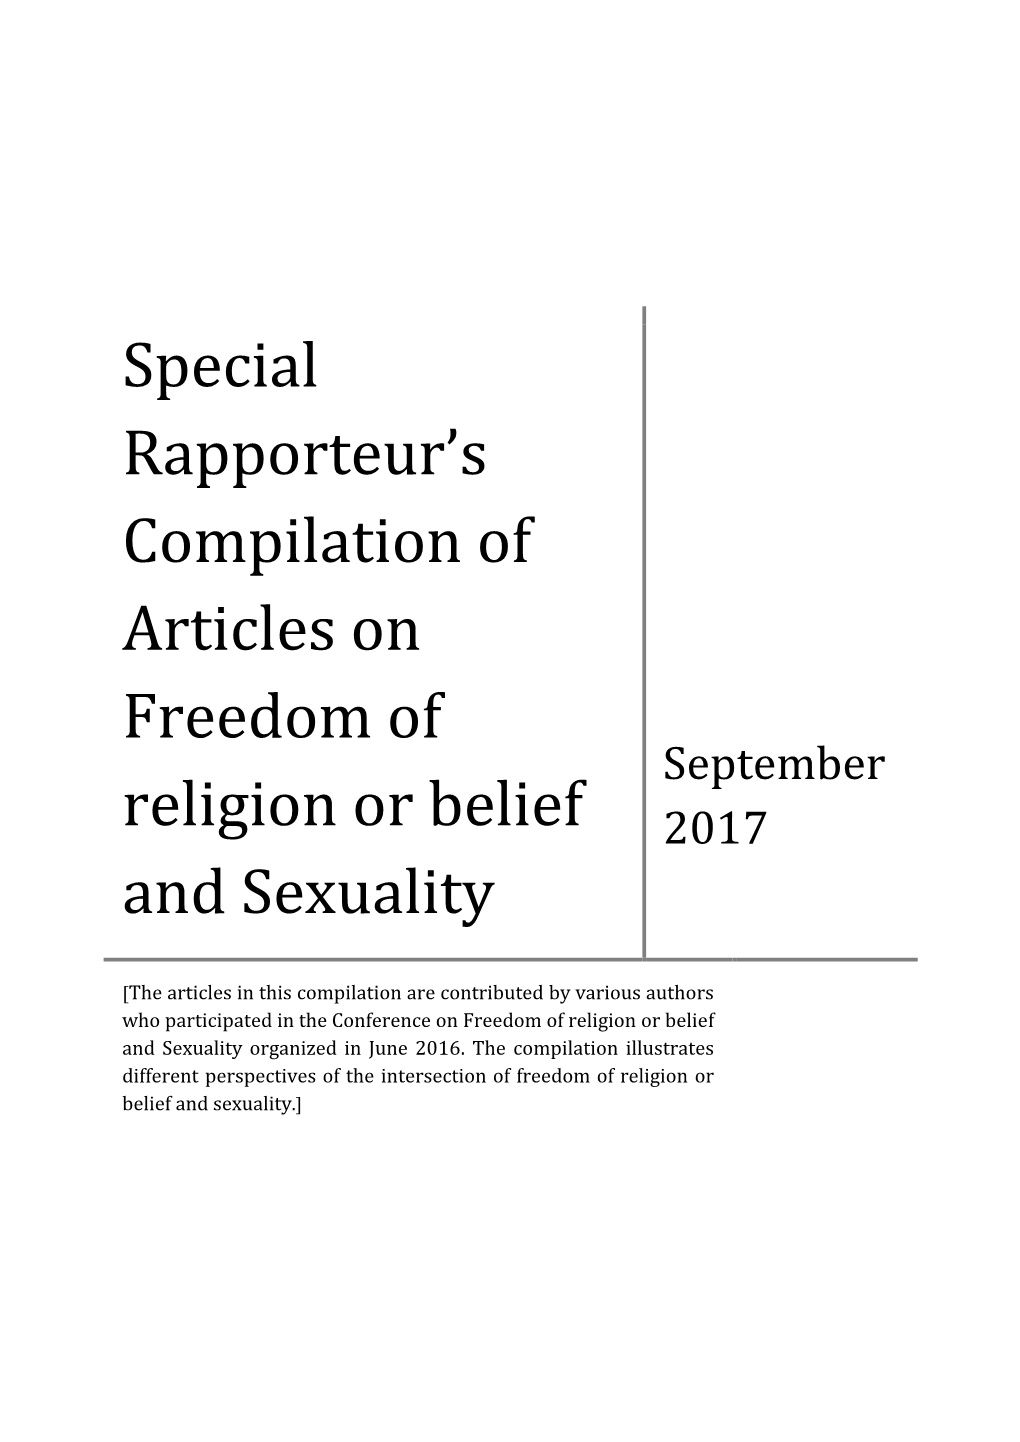 Special Rapporteur's Compilation of Articles on Freedom of Religion Or